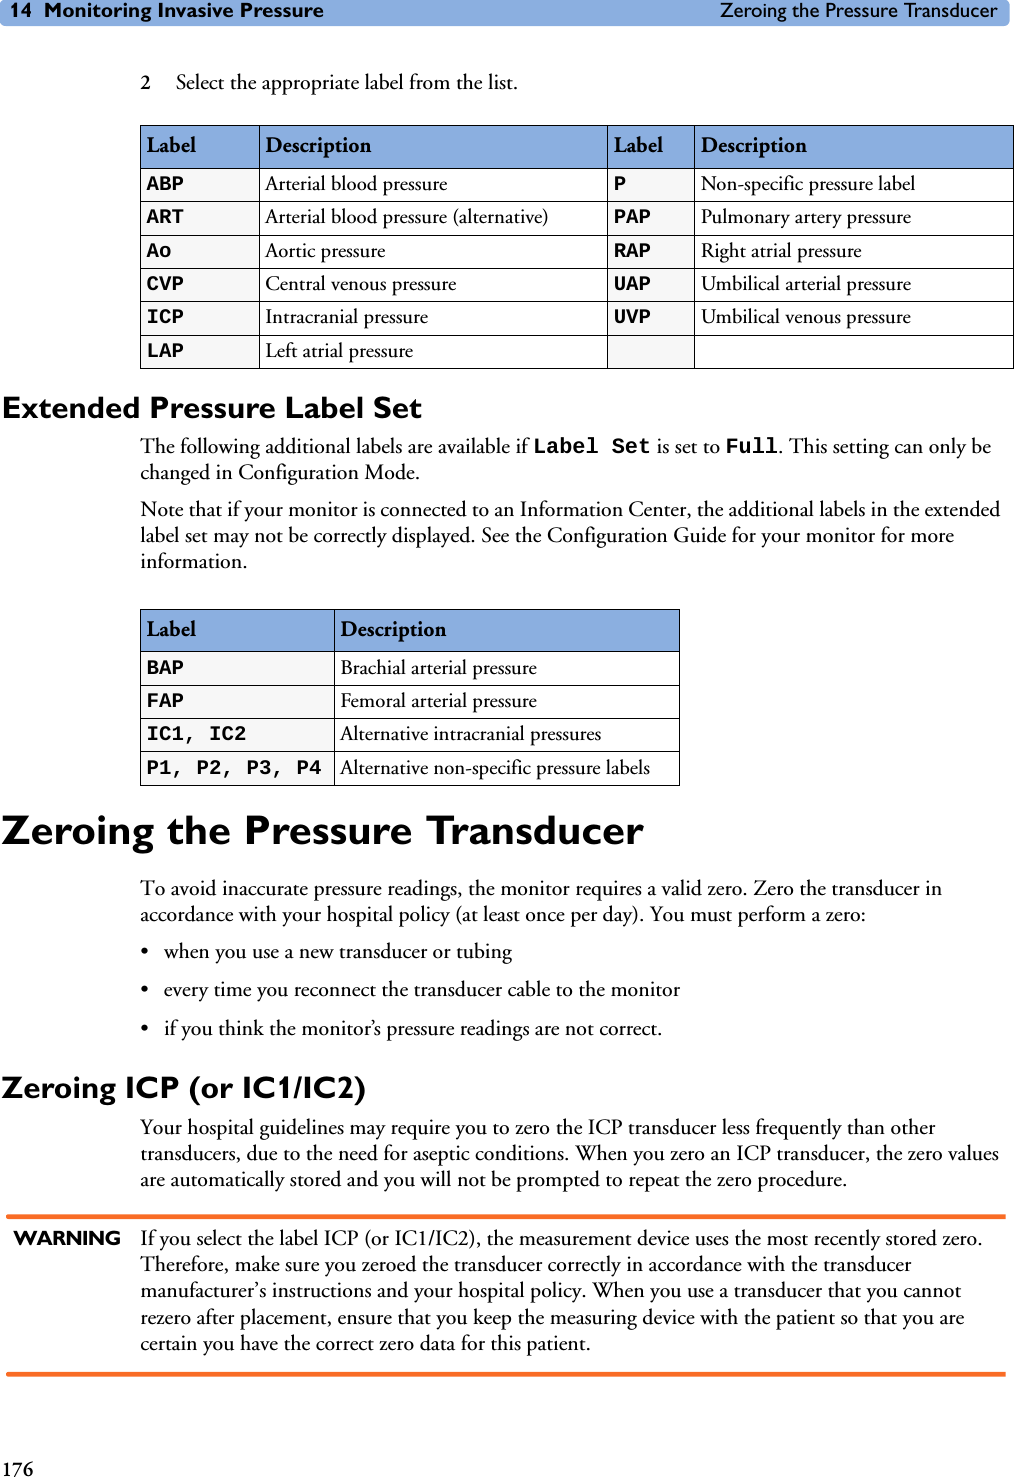 14 Monitoring Invasive Pressure Zeroing the Pressure Transducer1762Select the appropriate label from the list.Extended Pressure Label SetThe following additional labels are available if Label Set is set to Full. This setting can only be changed in Configuration Mode. Note that if your monitor is connected to an Information Center, the additional labels in the extended label set may not be correctly displayed. See the Configuration Guide for your monitor for more information. Zeroing the Pressure TransducerTo avoid inaccurate pressure readings, the monitor requires a valid zero. Zero the transducer in accordance with your hospital policy (at least once per day). You must perform a zero: • when you use a new transducer or tubing• every time you reconnect the transducer cable to the monitor• if you think the monitor’s pressure readings are not correct. Zeroing ICP (or IC1/IC2)Your hospital guidelines may require you to zero the ICP transducer less frequently than other transducers, due to the need for aseptic conditions. When you zero an ICP transducer, the zero values are automatically stored and you will not be prompted to repeat the zero procedure. WARNING If you select the label ICP (or IC1/IC2), the measurement device uses the most recently stored zero. Therefore, make sure you zeroed the transducer correctly in accordance with the transducer manufacturer’s instructions and your hospital policy. When you use a transducer that you cannot rezero after placement, ensure that you keep the measuring device with the patient so that you are certain you have the correct zero data for this patient.Label Description Label DescriptionABP Arterial blood pressure PNon-specific pressure labelART  Arterial blood pressure (alternative) PAP Pulmonary artery pressureAo Aortic pressure RAP Right atrial pressureCVP Central venous pressure UAP Umbilical arterial pressureICP Intracranial pressure UVP Umbilical venous pressureLAP Left atrial pressureLabel DescriptionBAP Brachial arterial pressureFAP Femoral arterial pressureIC1, IC2 Alternative intracranial pressures P1, P2, P3, P4 Alternative non-specific pressure labels